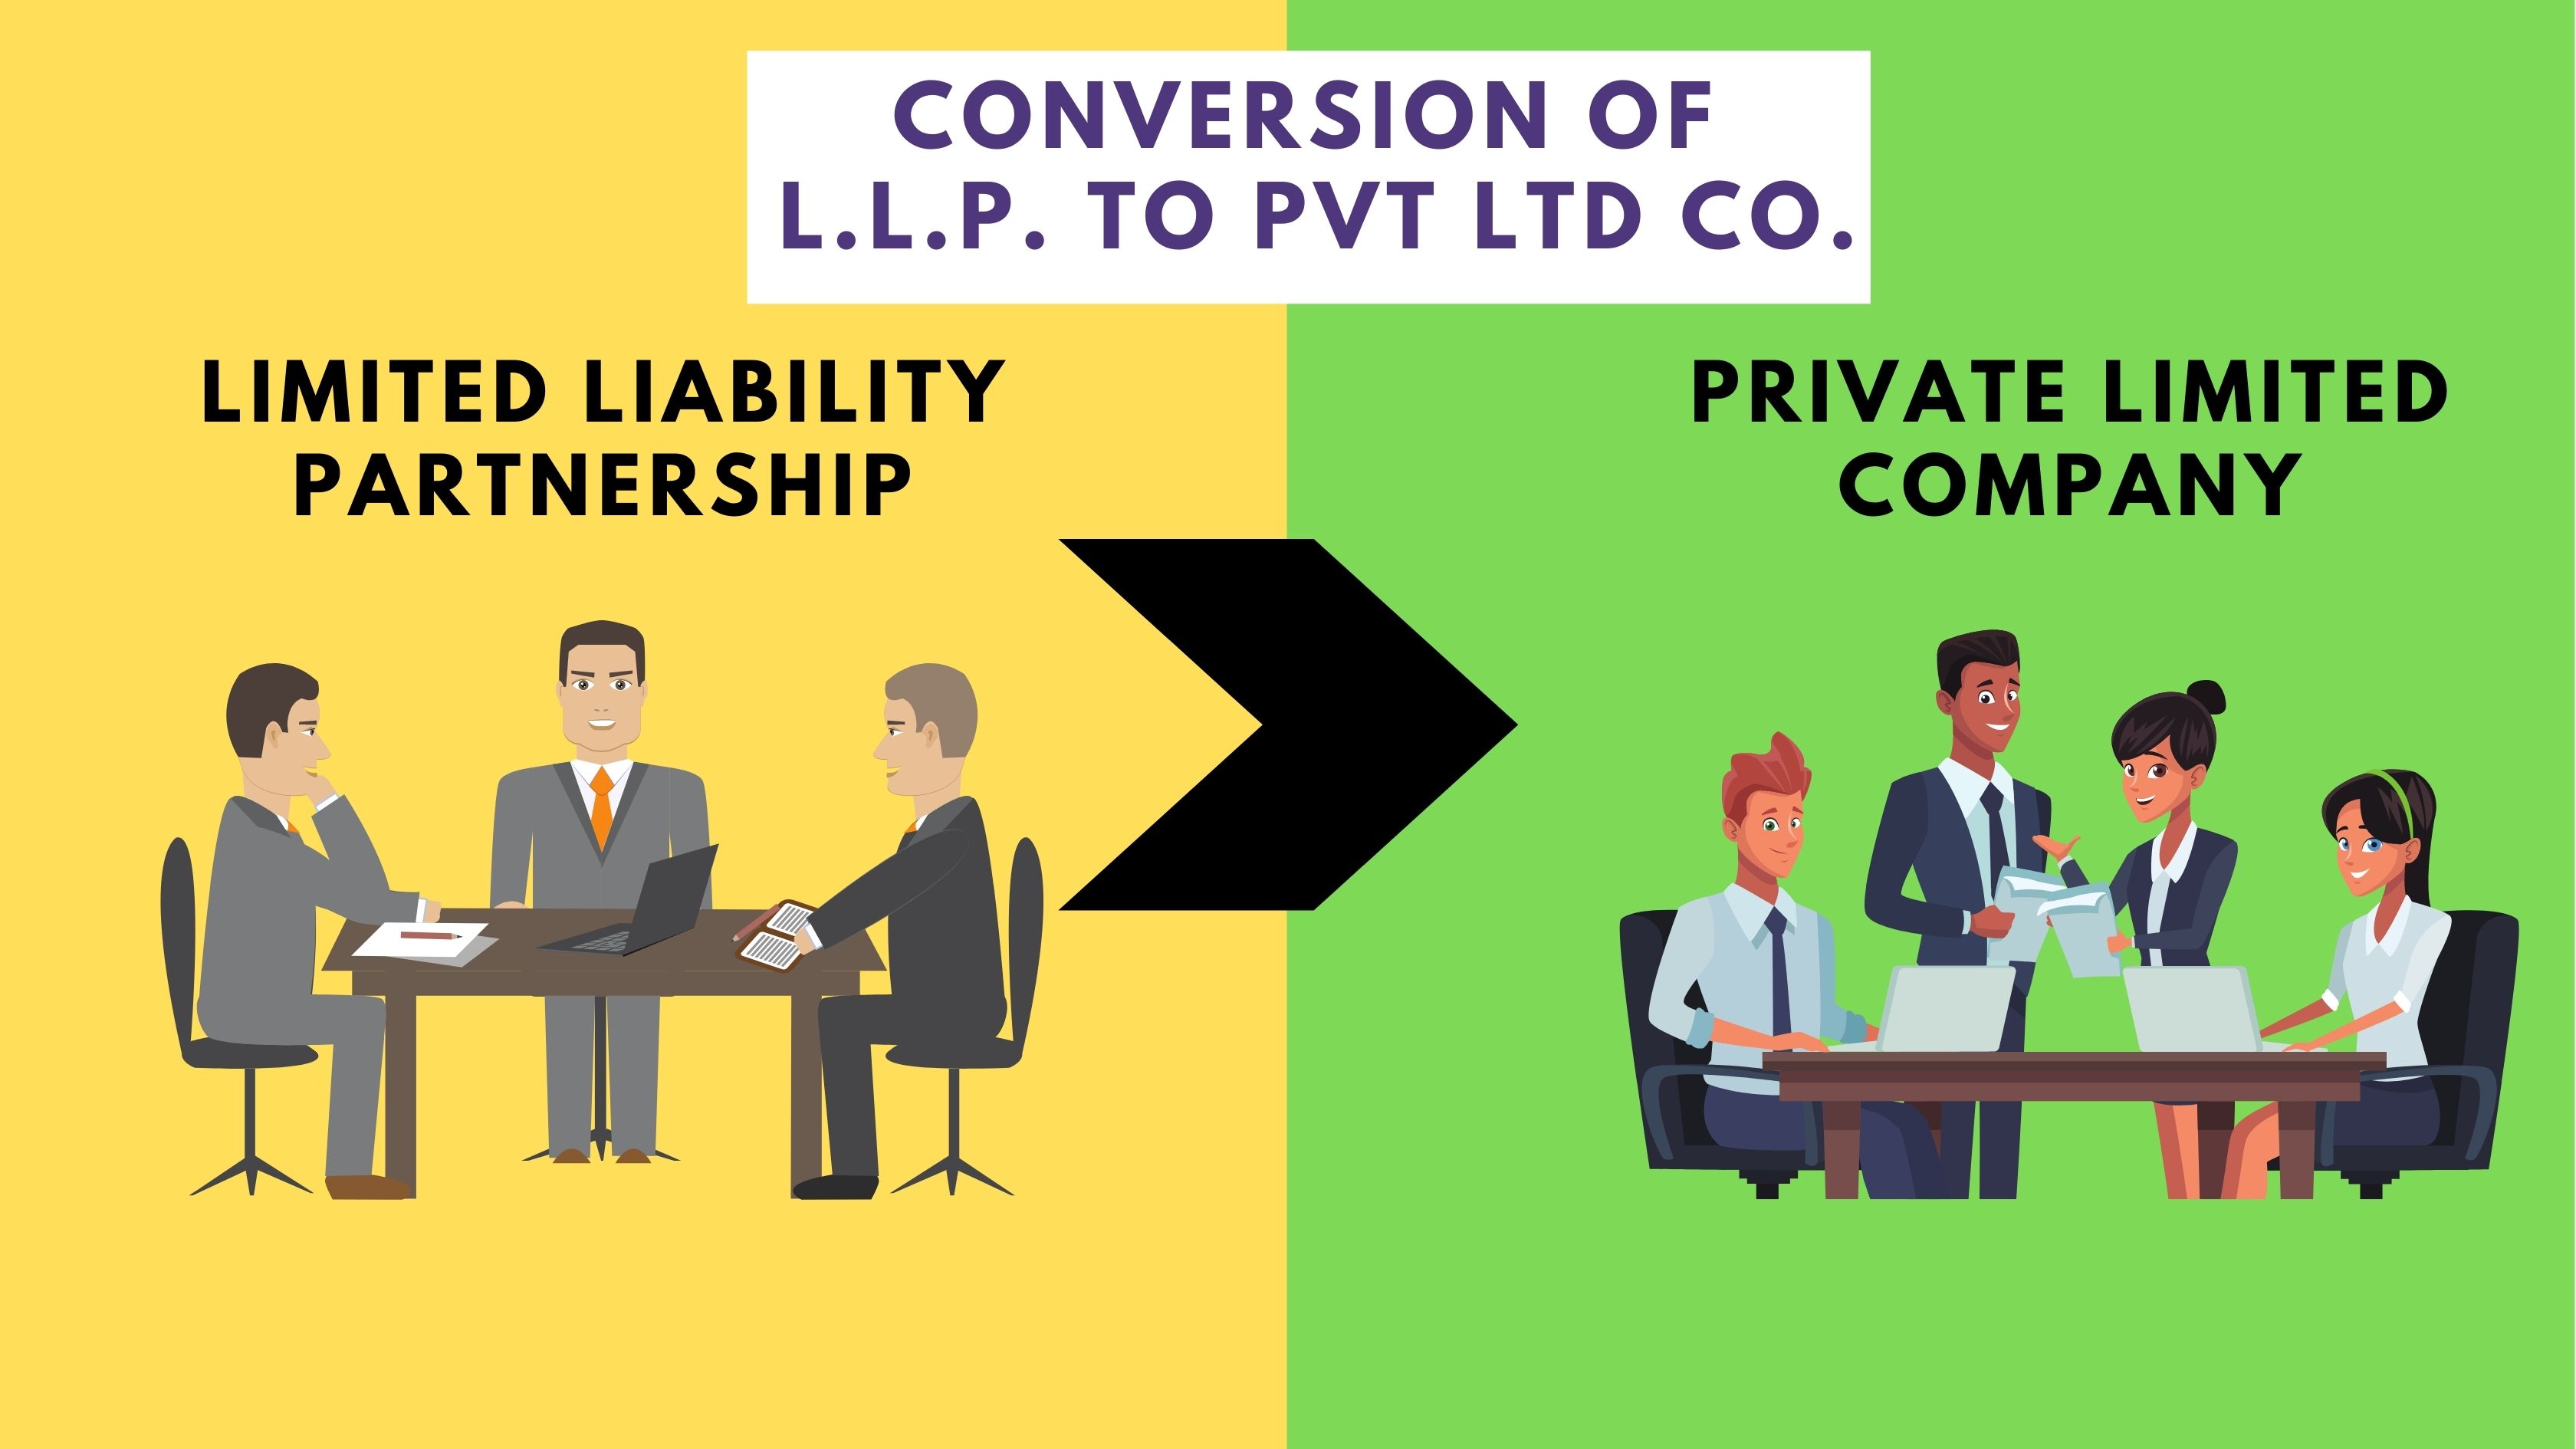 Conversion of limited liability partnership to Private limited company